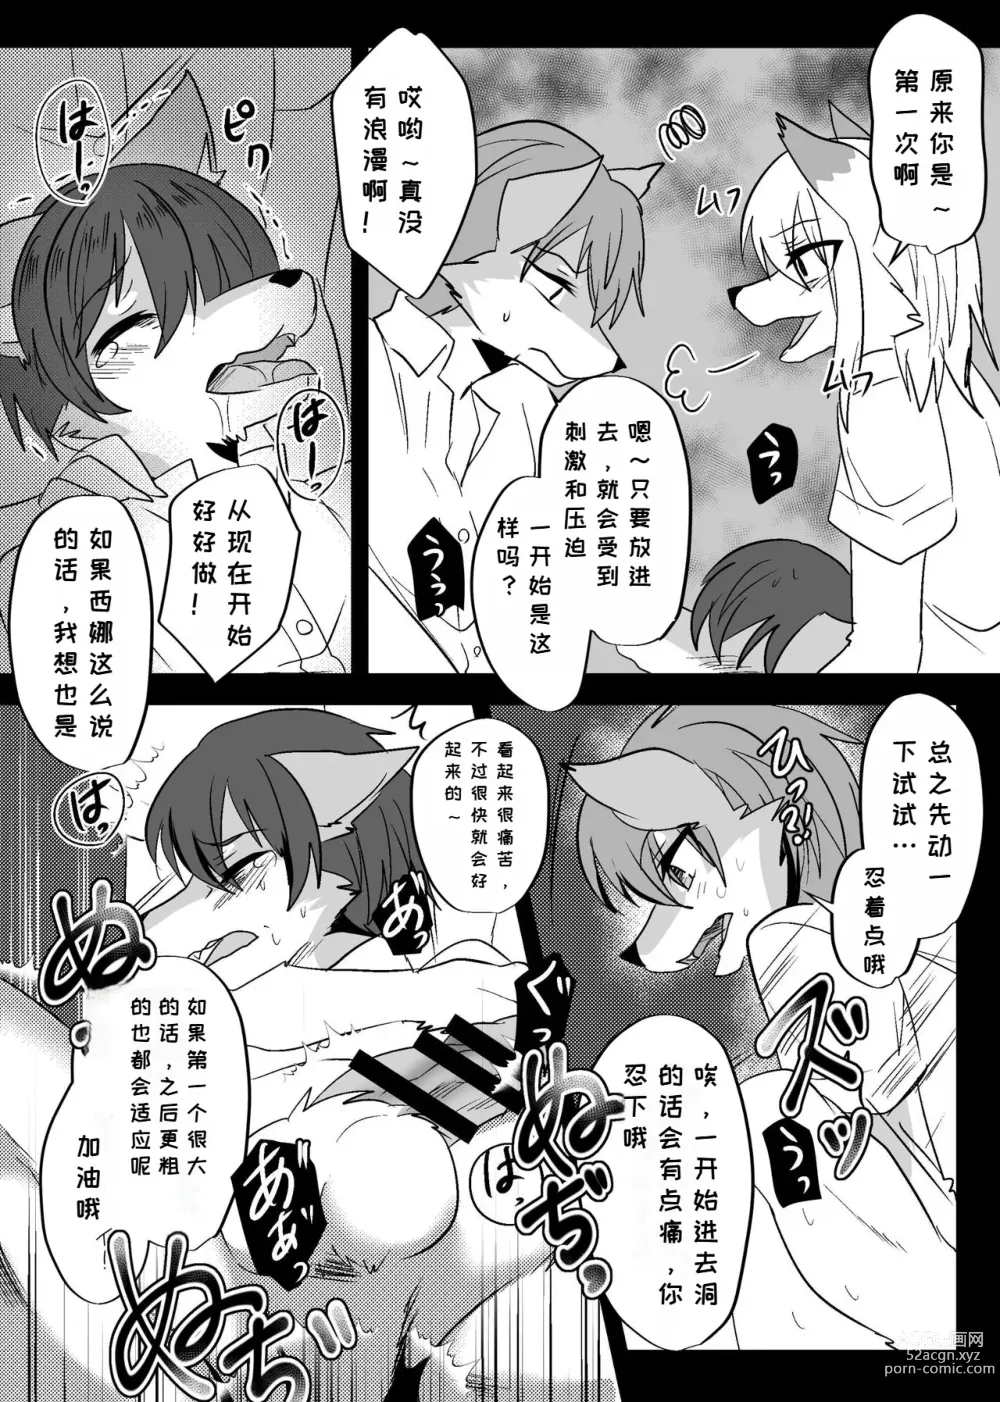 Page 24 of doujinshi 我们发情出勤科 3